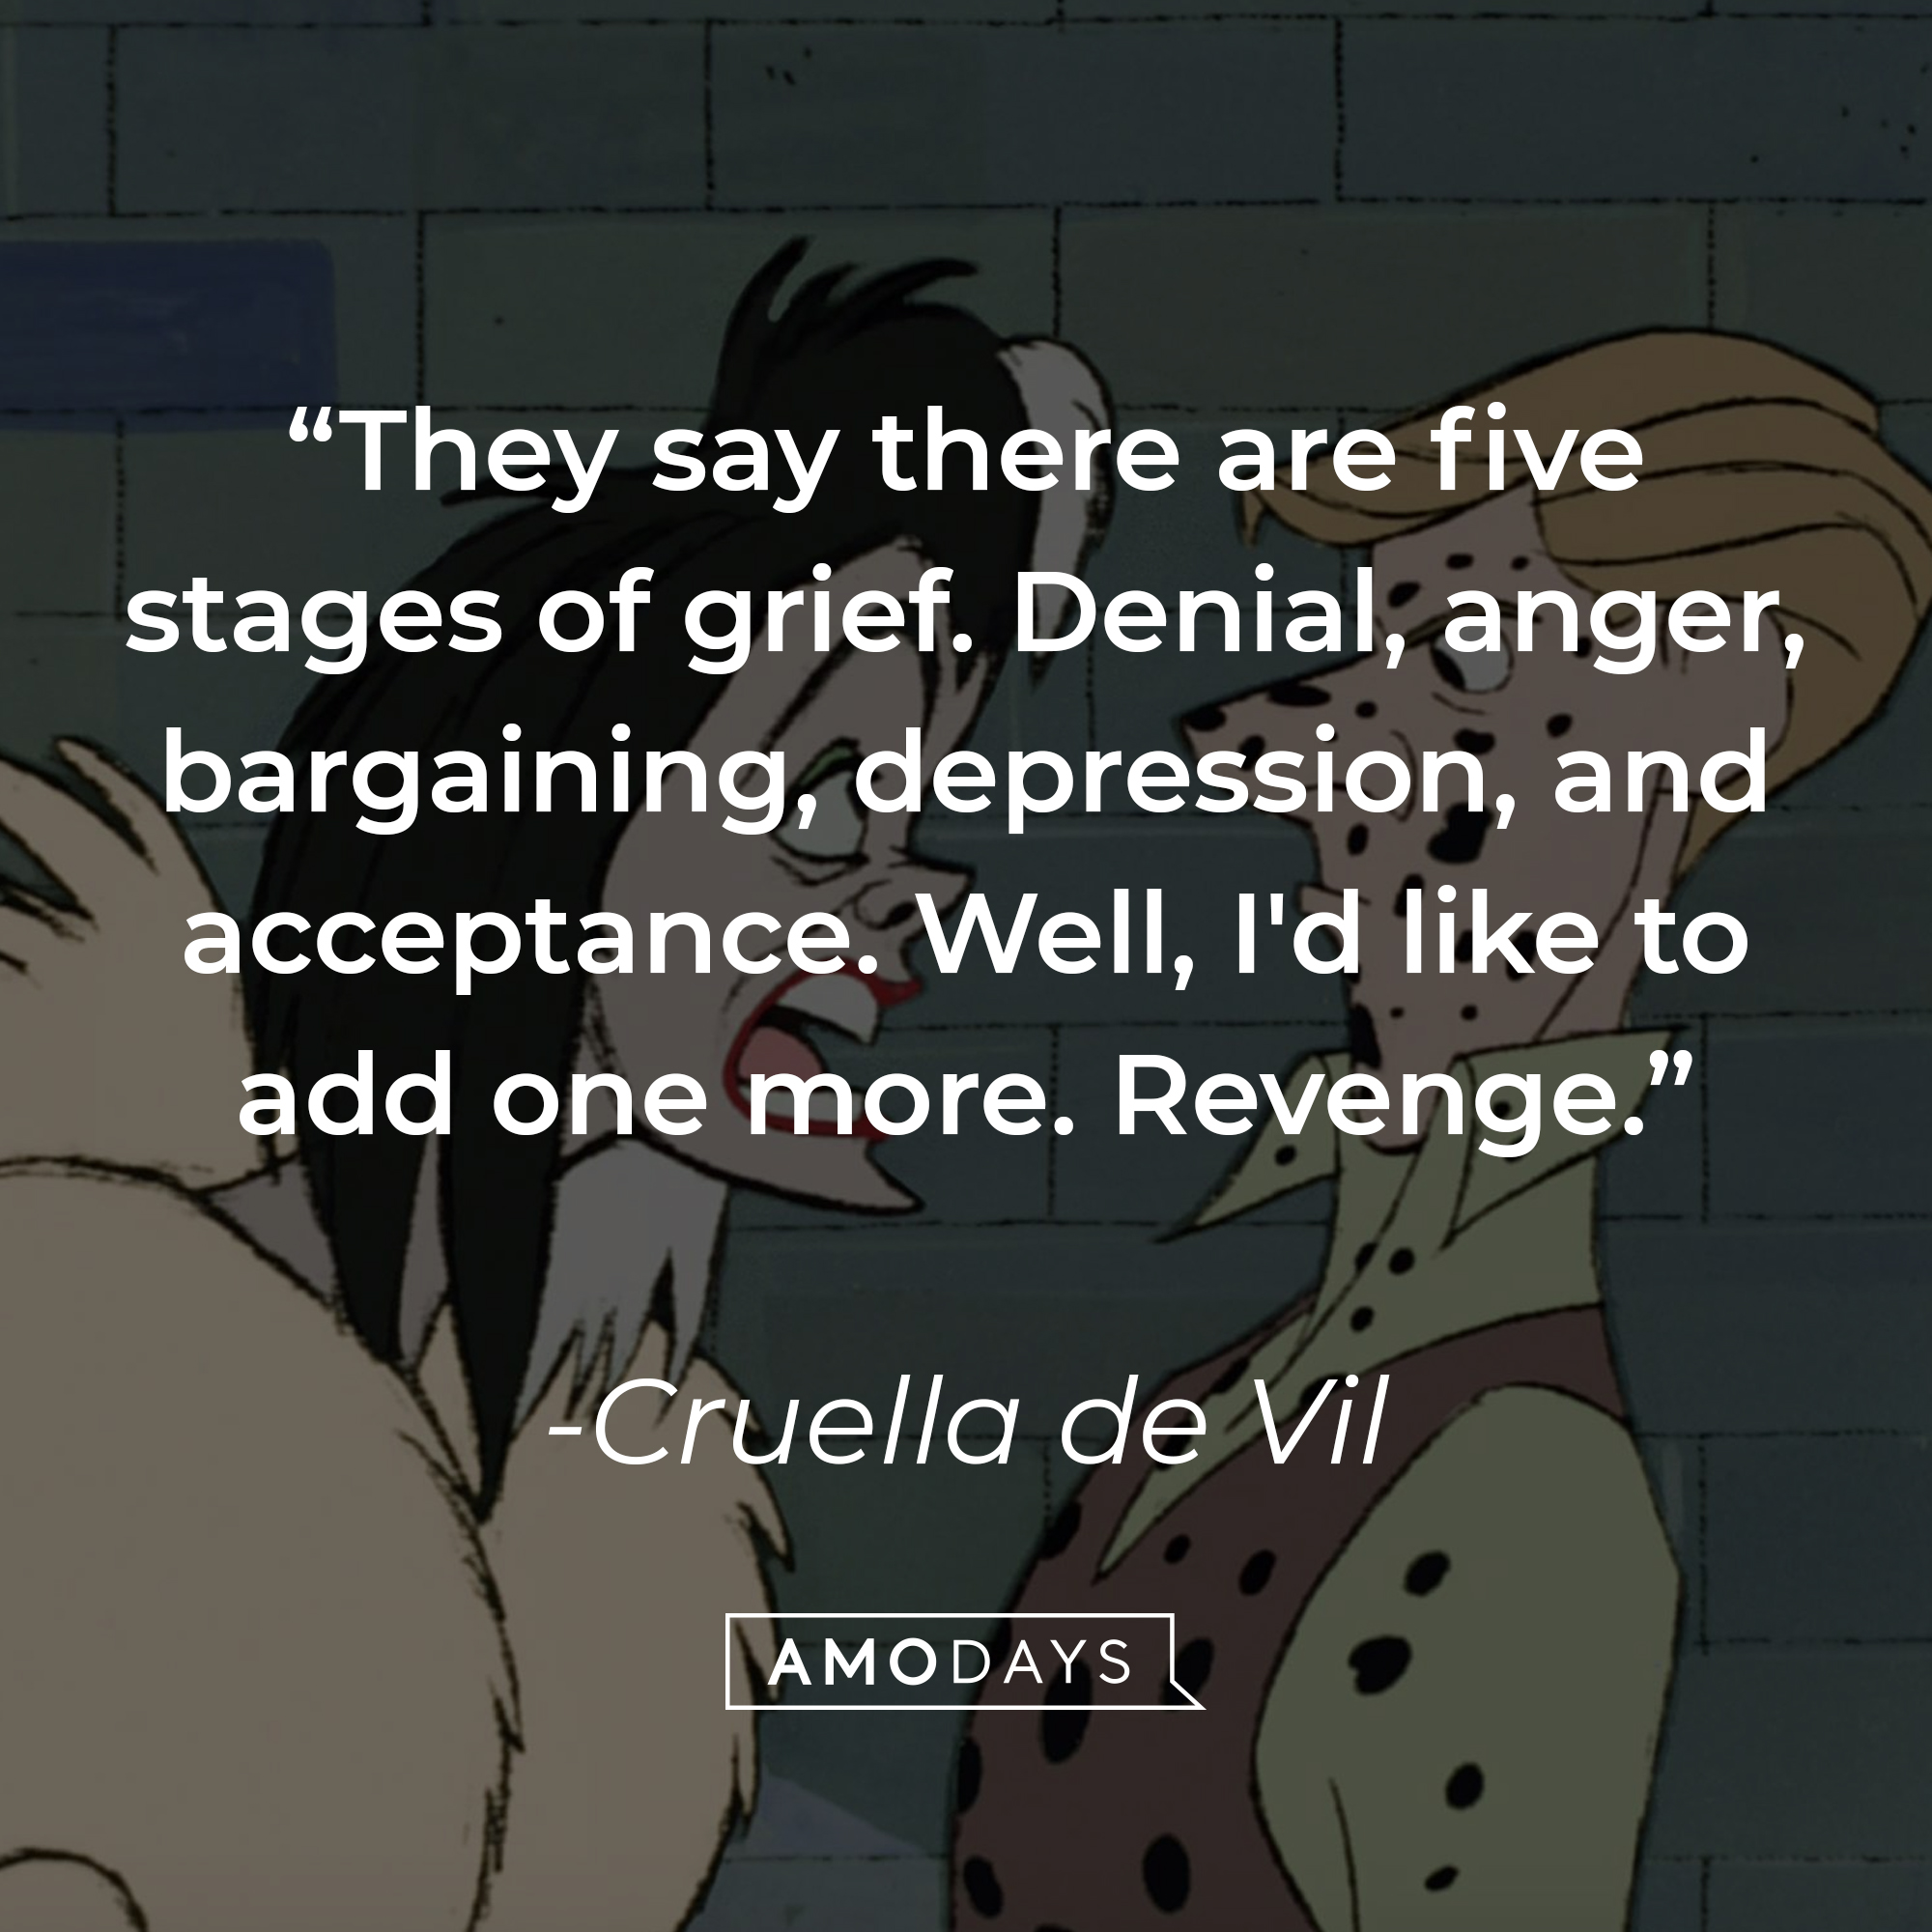 An image of the animated Cruella de Vil, with a quote from the same adapted character in the 2021 film “Cruella”: “They say there are five stages of grief. Denial, anger, bargaining, depression, and acceptance. Well, I'd like to add one more. Revenge.”  |  Source: Facebook.com/DisneyCruellaDeVil